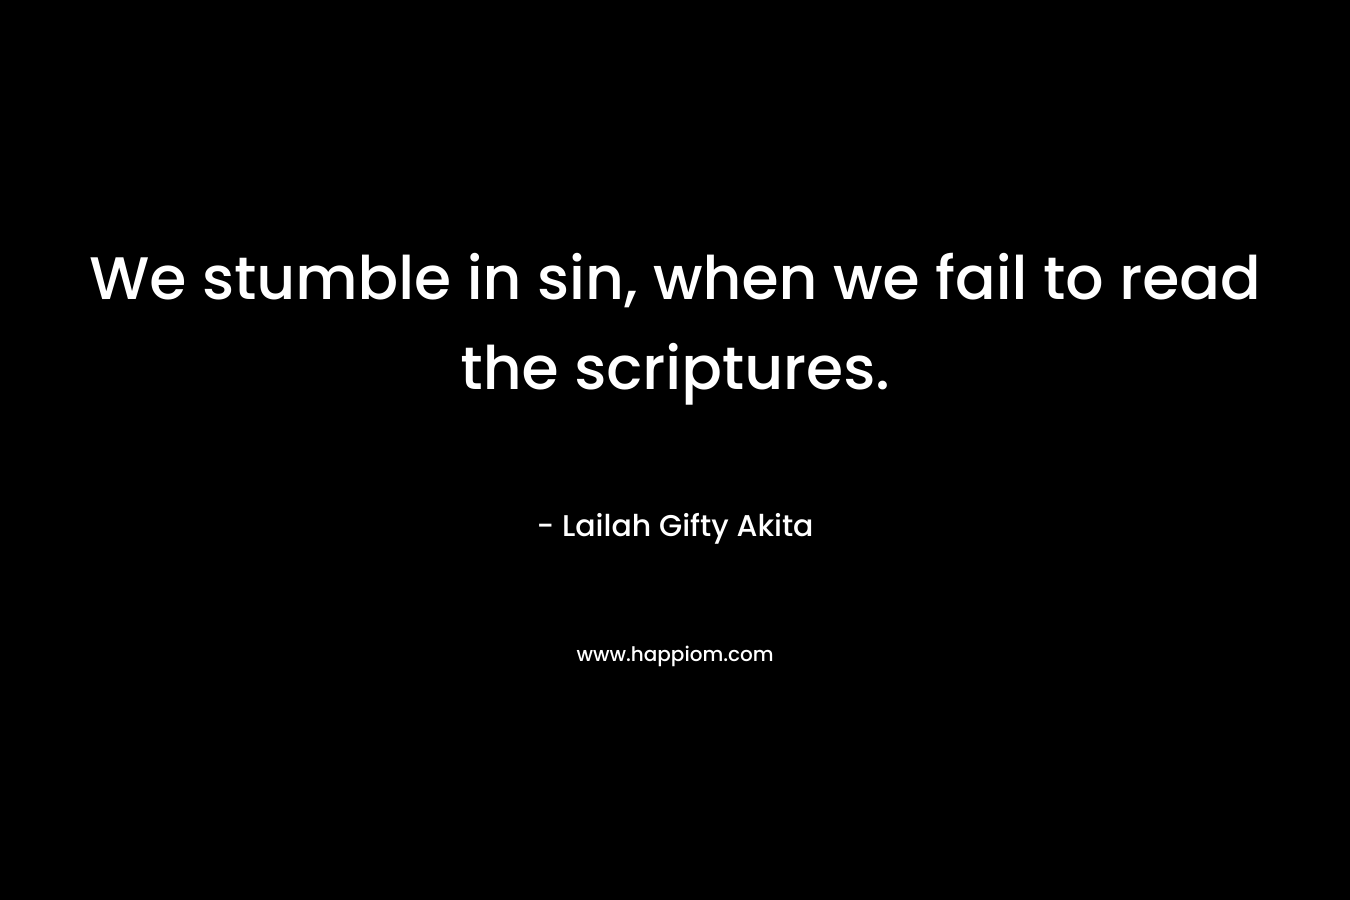 We stumble in sin, when we fail to read the scriptures. – Lailah Gifty Akita